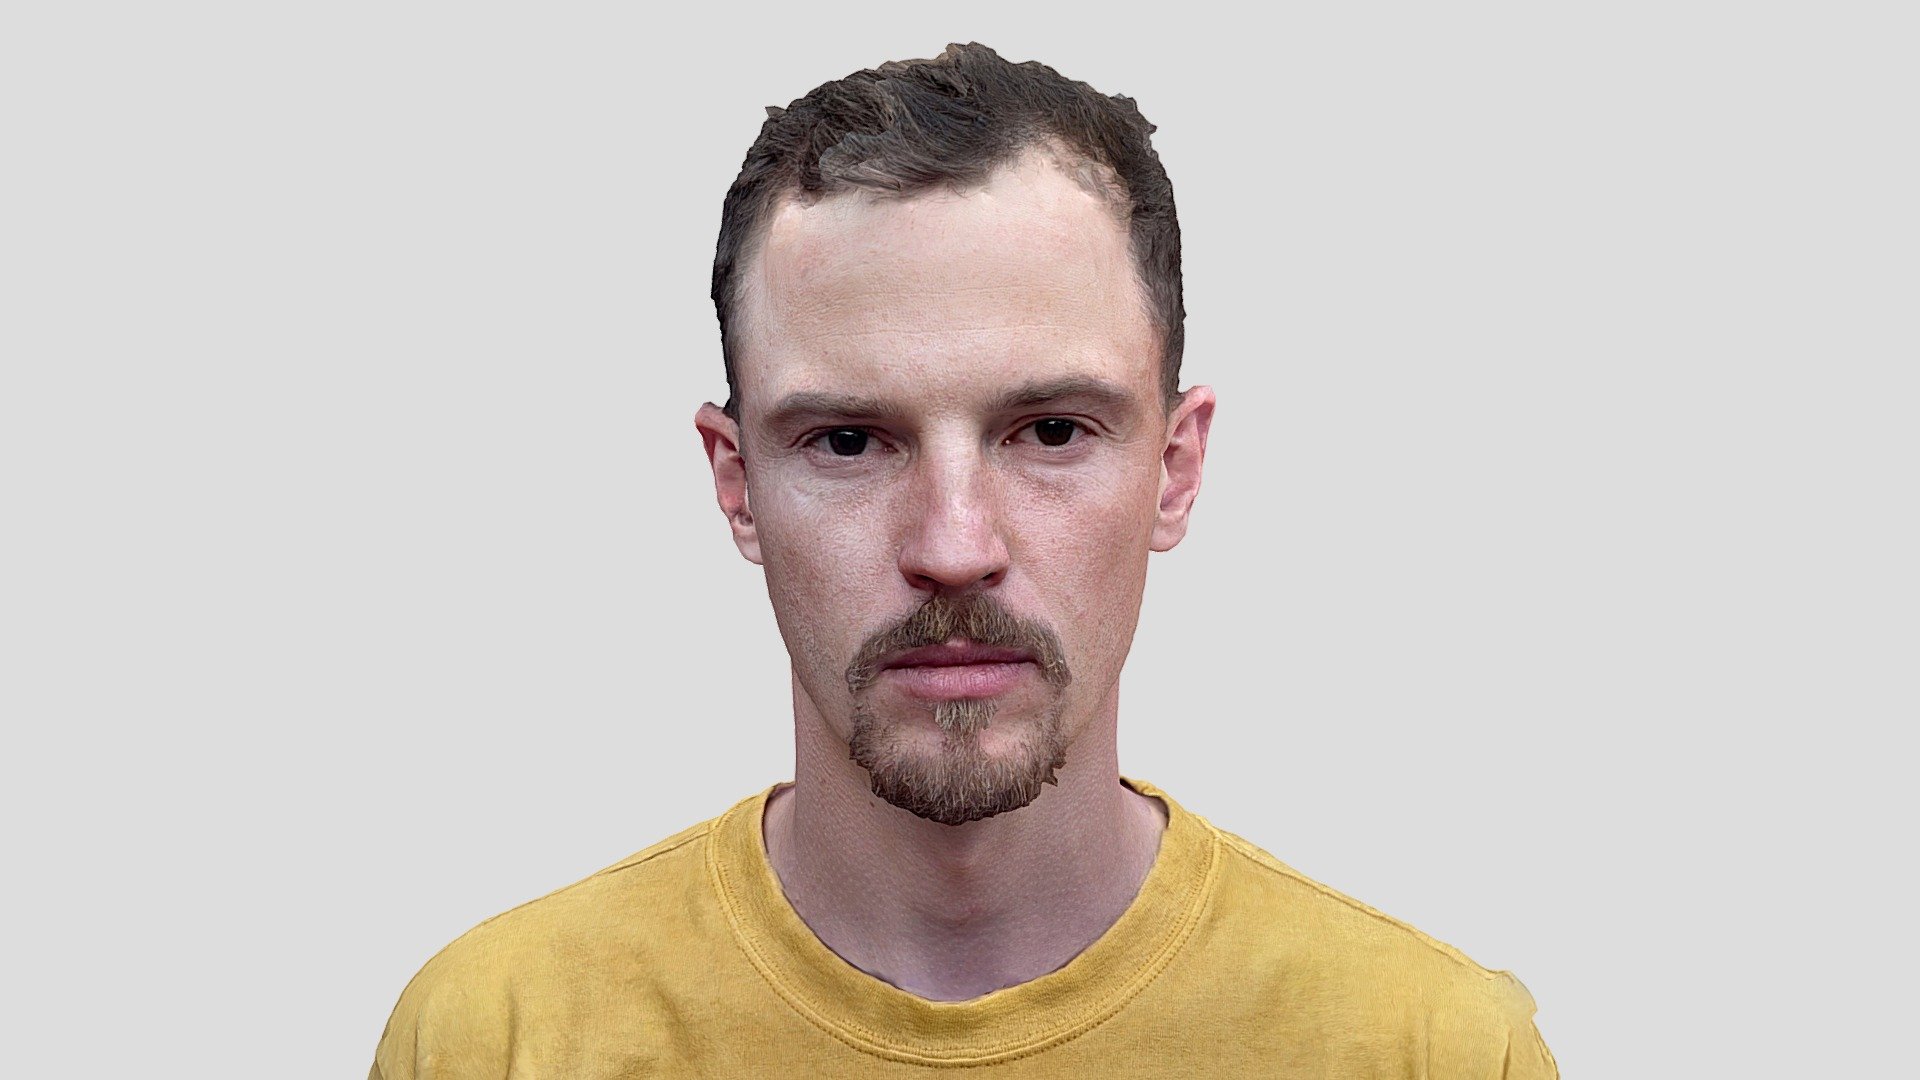 Photorealistic head scan of a young bearded man.

Shot on iPhone 12 Pro Max, processed in Photocatch app on Macbook Air M1.

P.S. you are welcome to contact me if you need the files 3d model